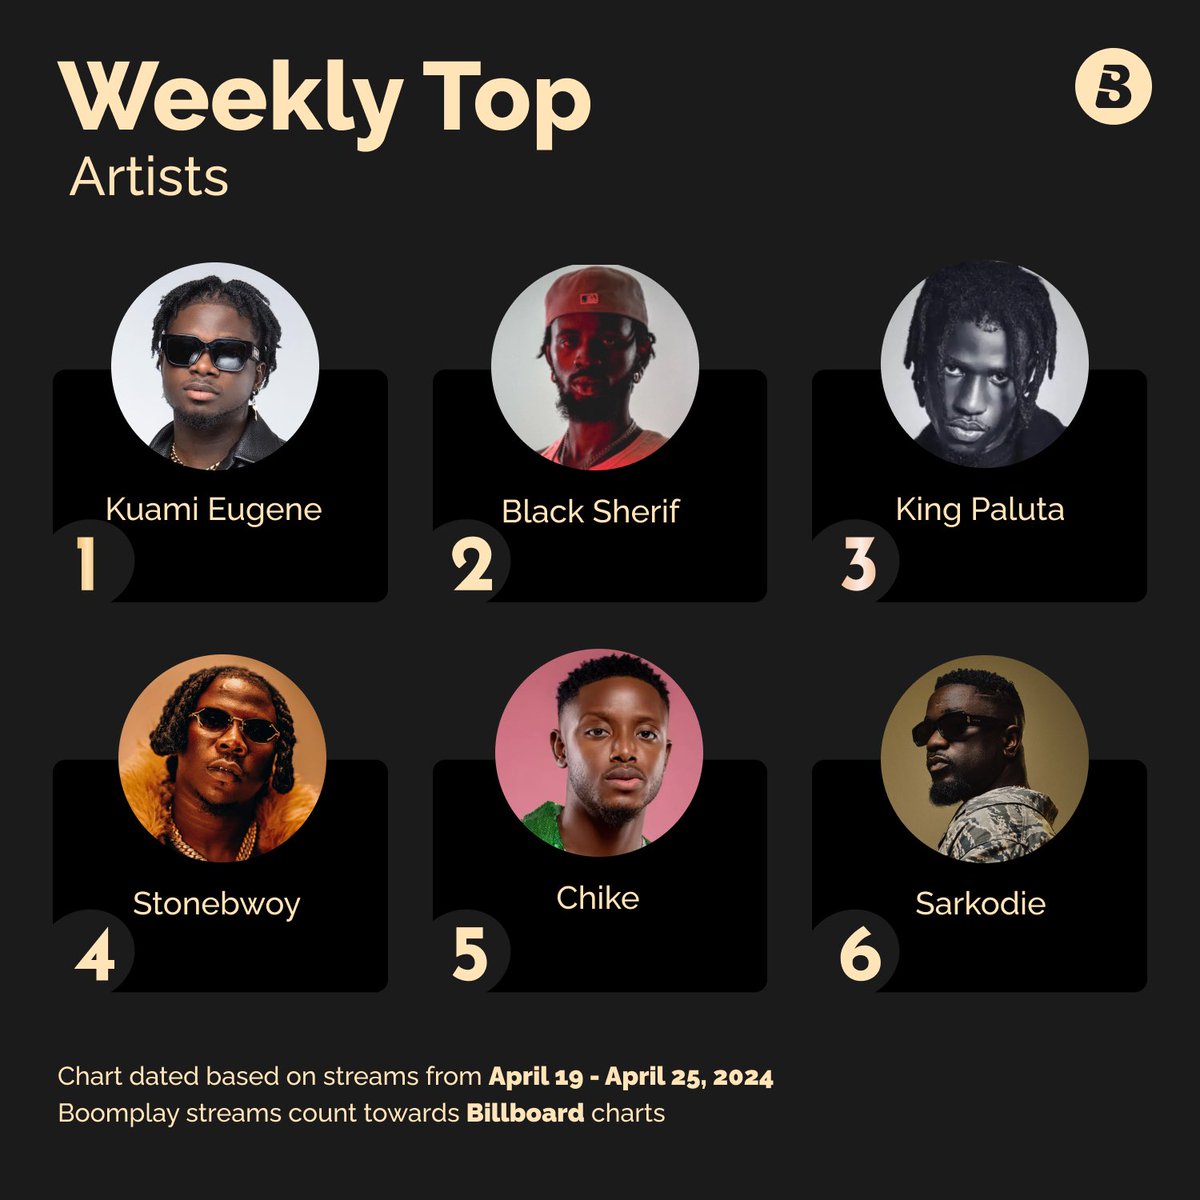 Boomplay, your last warning ‼️

My Shatta Wale with 29singles and 8 track album in 2024 must ve people streaming his music on Boomplay every week to be in weekly top acts.

Won't warn u guys again oo, yoo!!